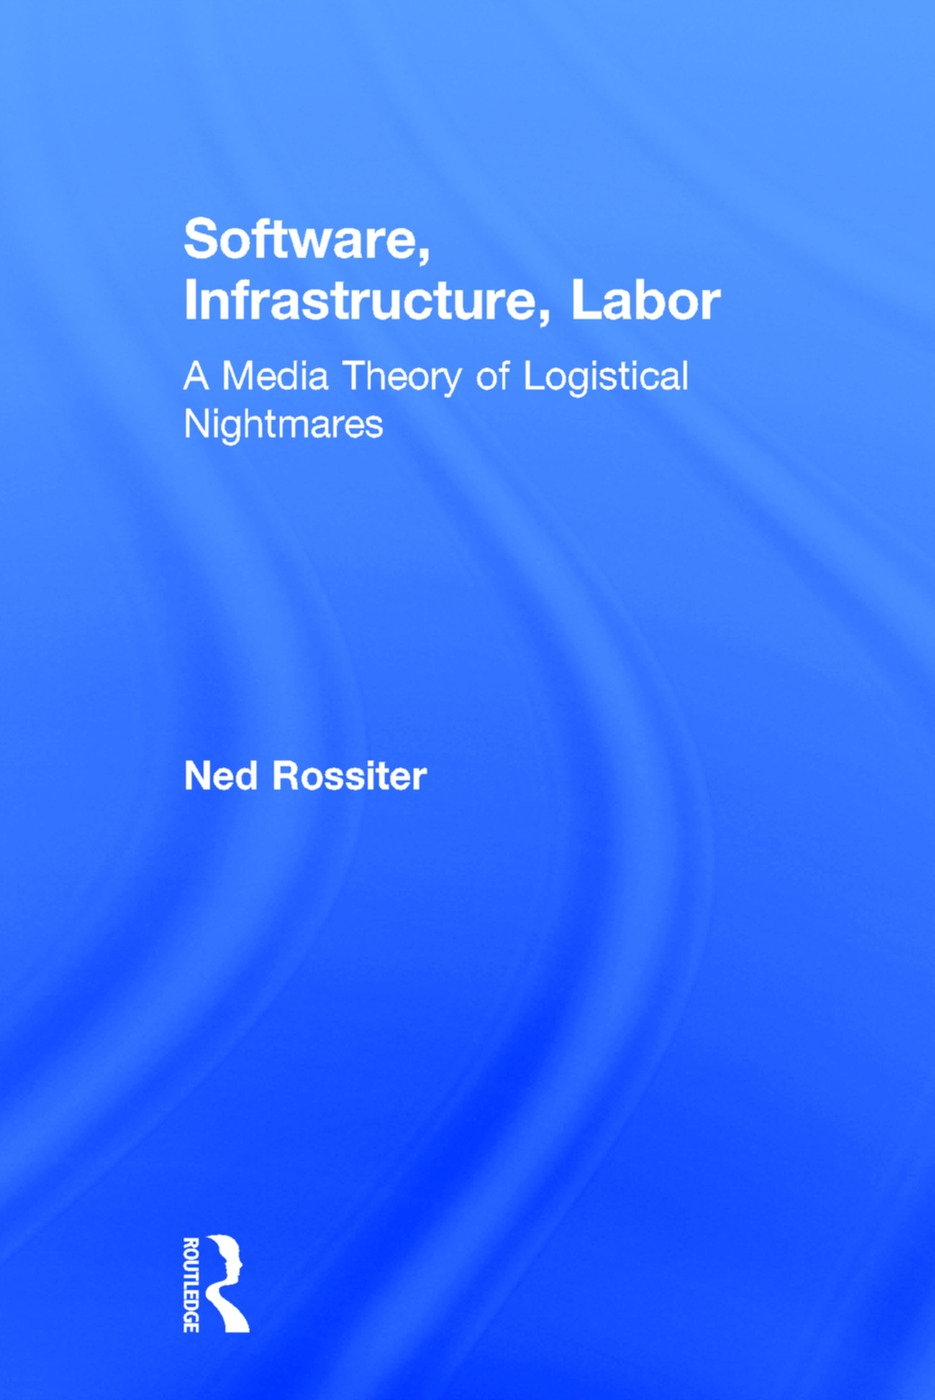 Software, Infrastructure, Labor: A Media Theory of Logistical Nightmares